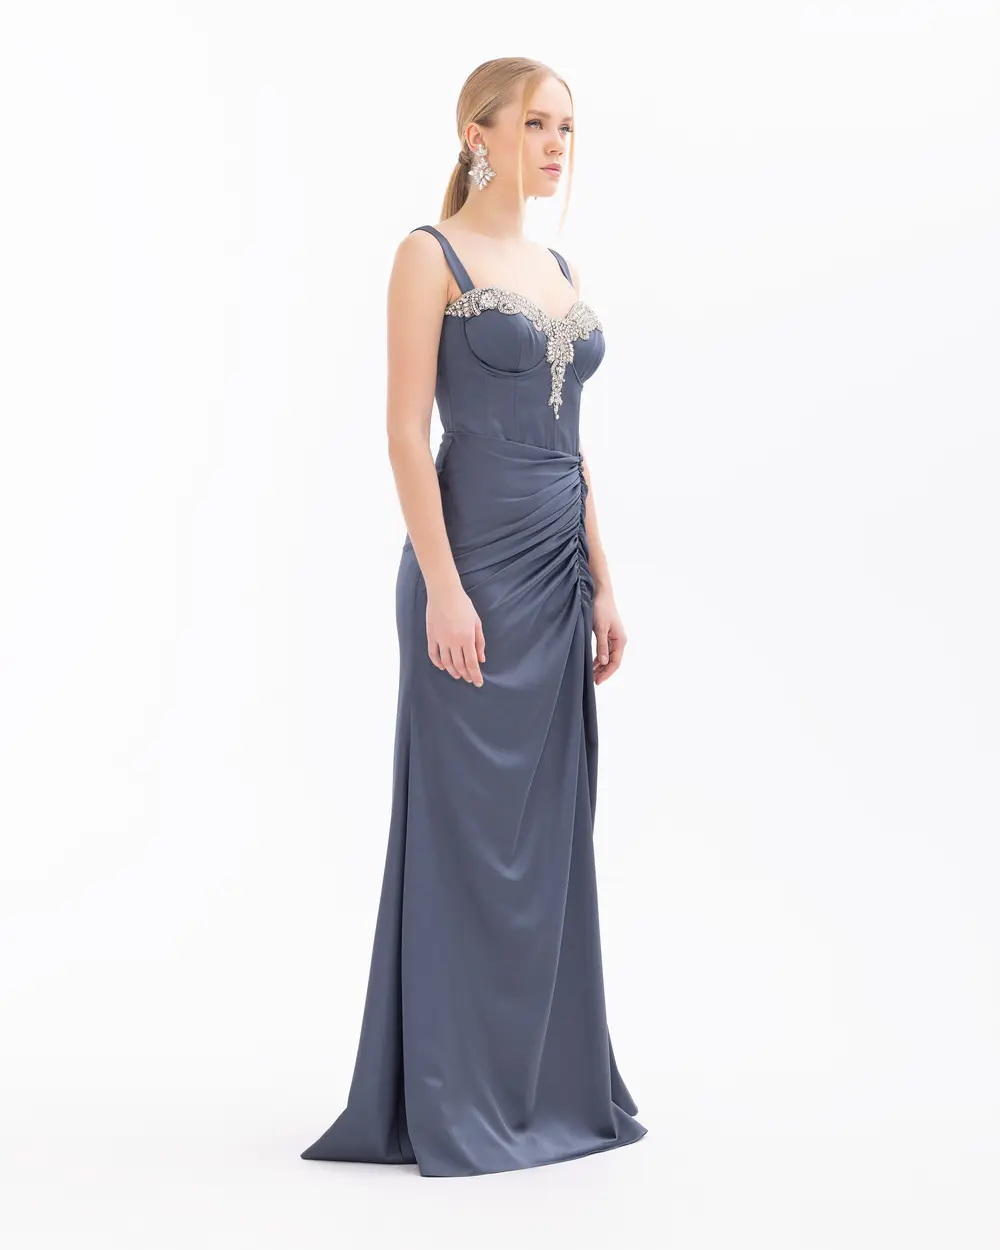 Satin Draped Evening Dress with Breast Cups